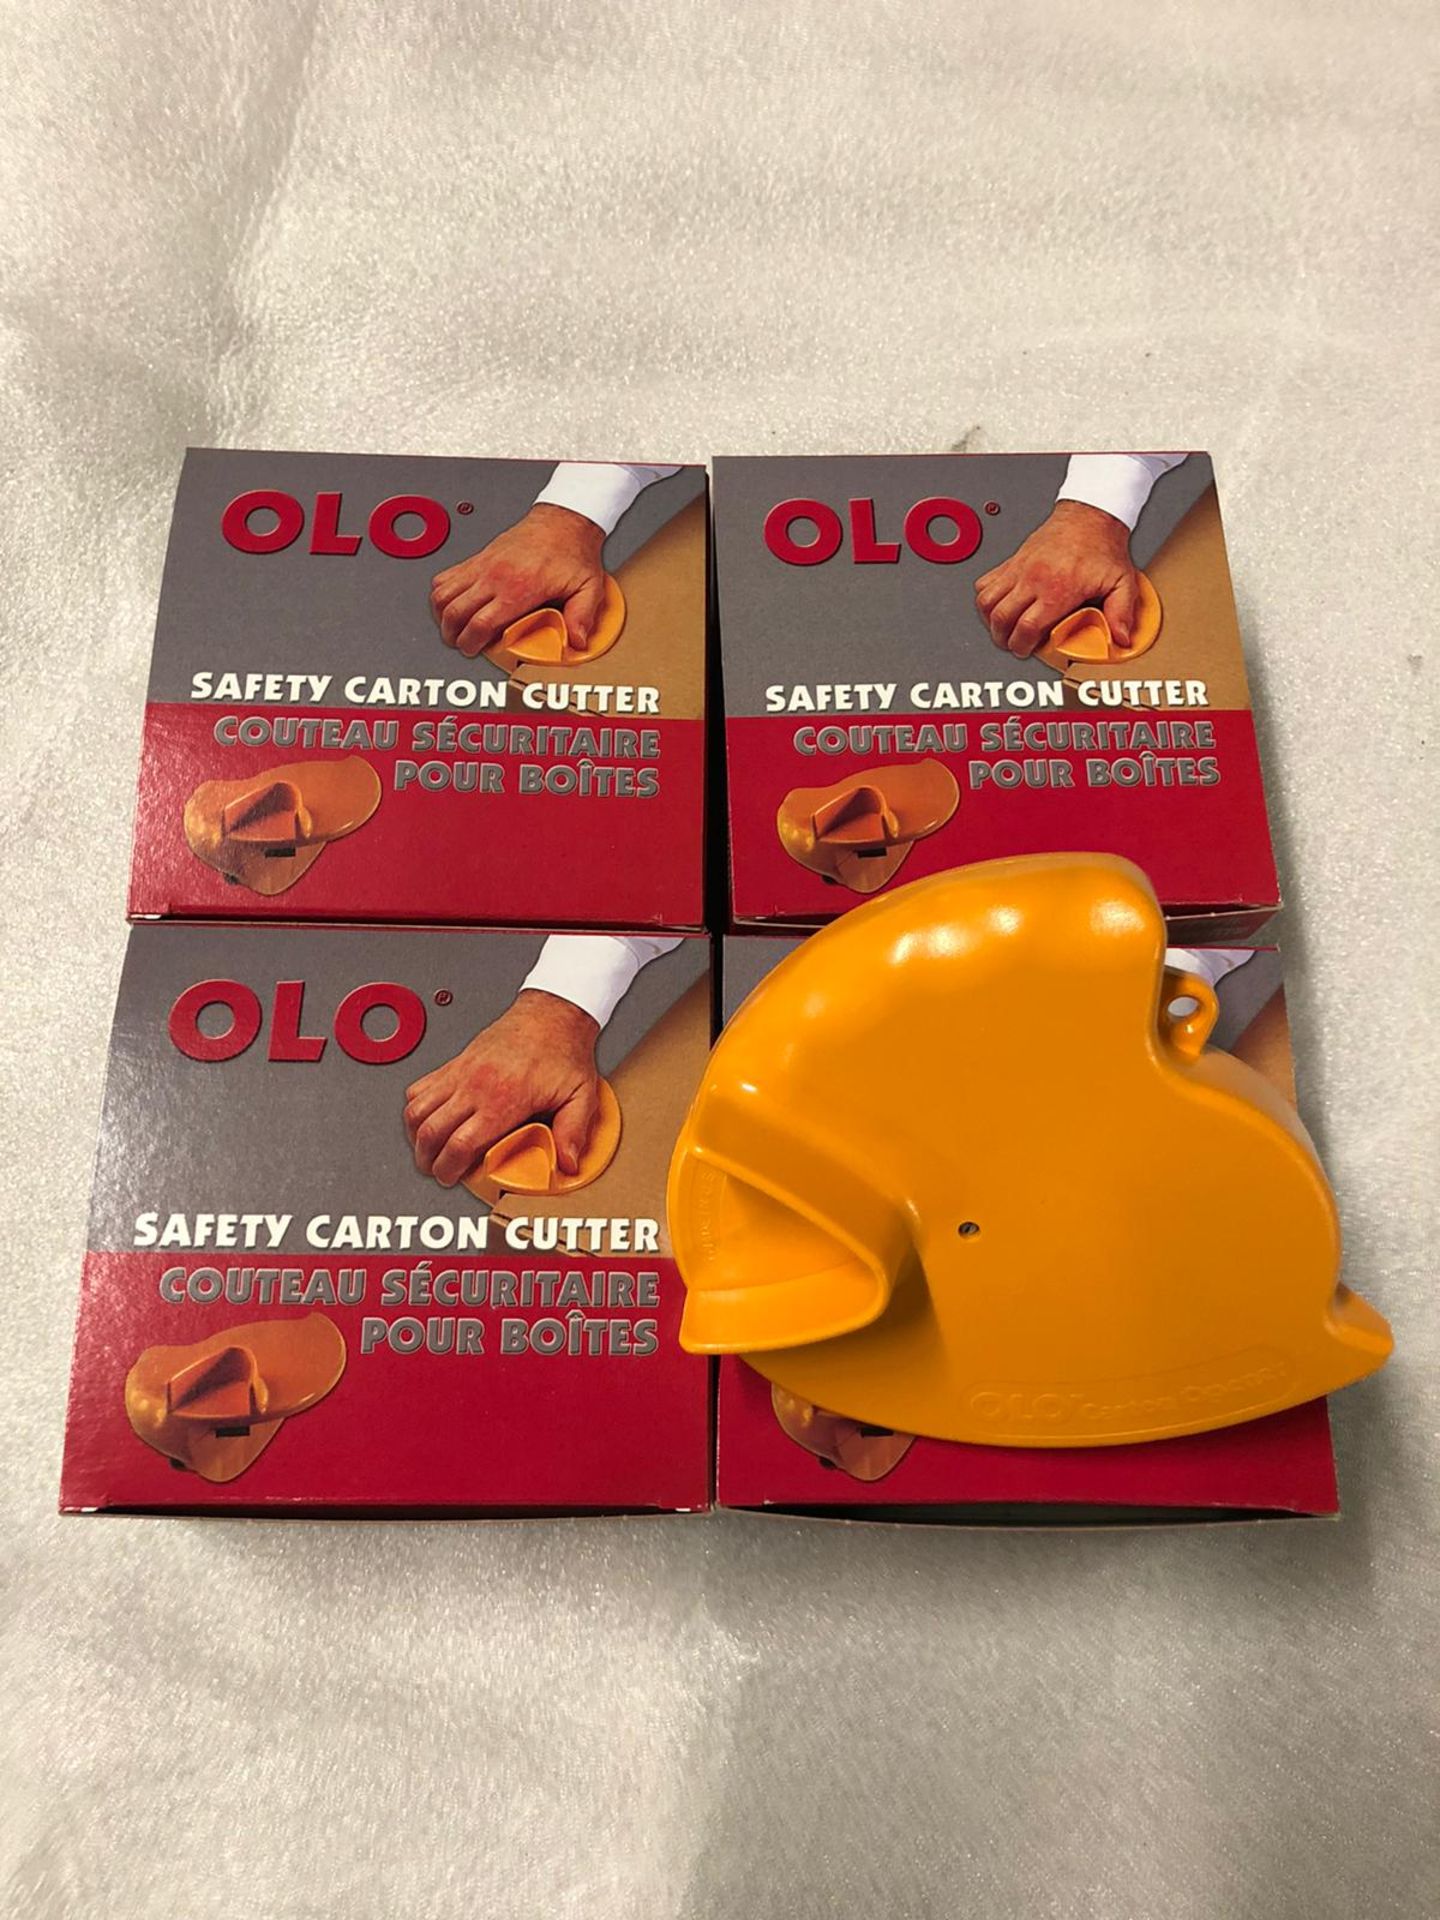 Lot of 4 boxes of Safety carton cutters